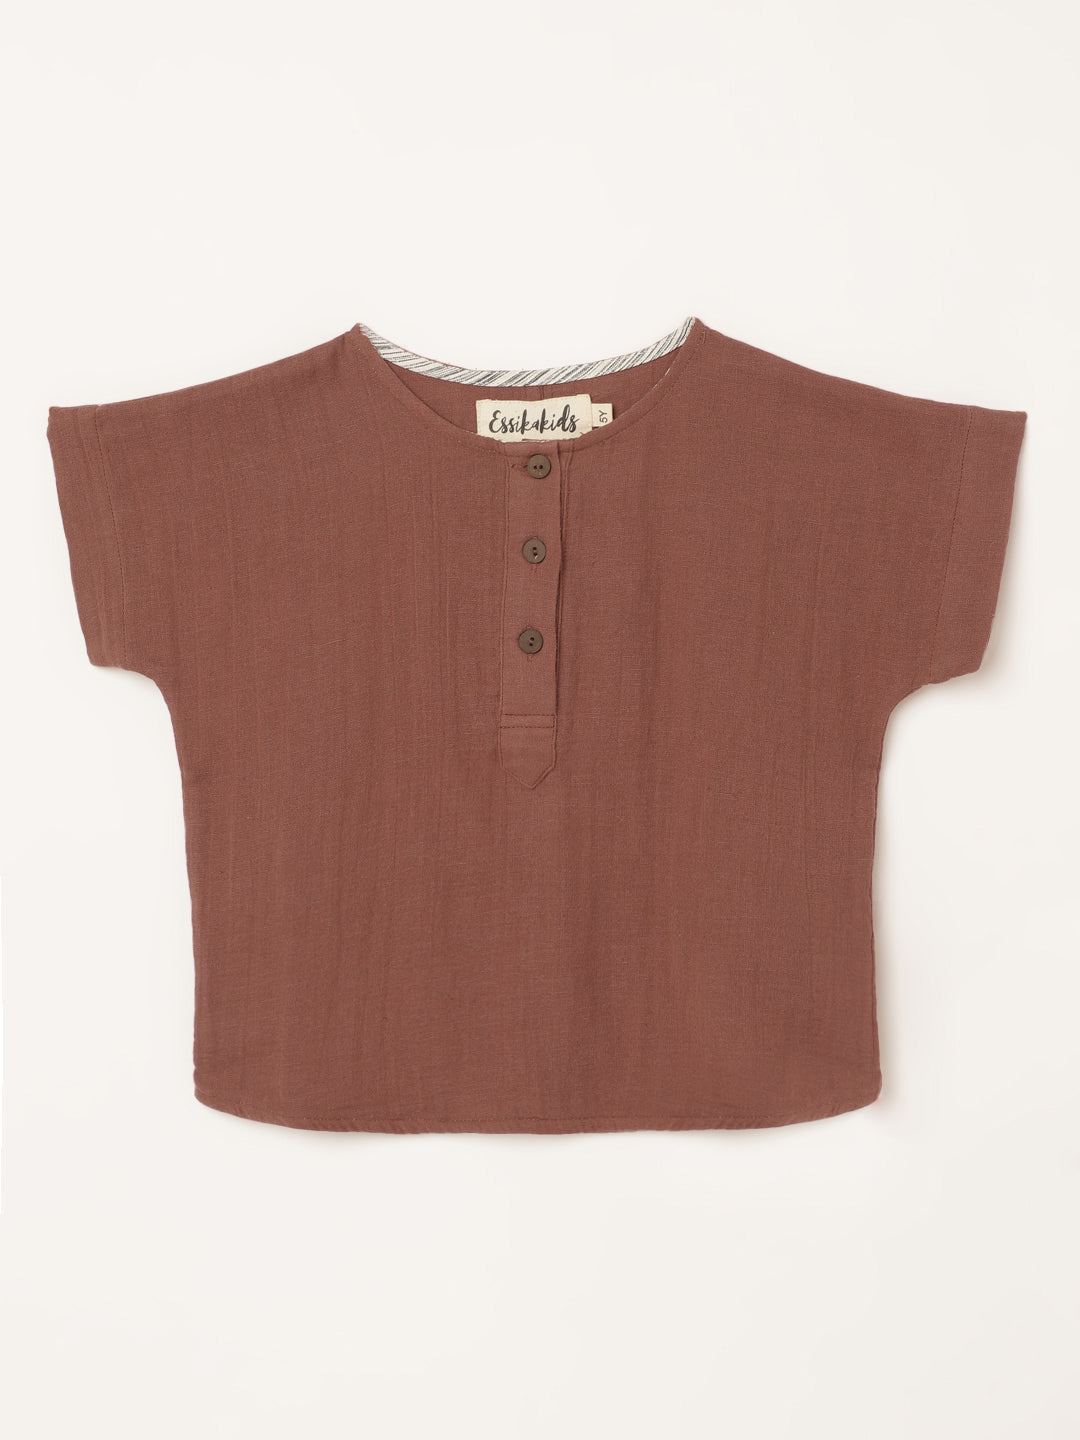 Boys Cotton Rust Brown Shirt | 1 Yr to 8 Yrs - Front